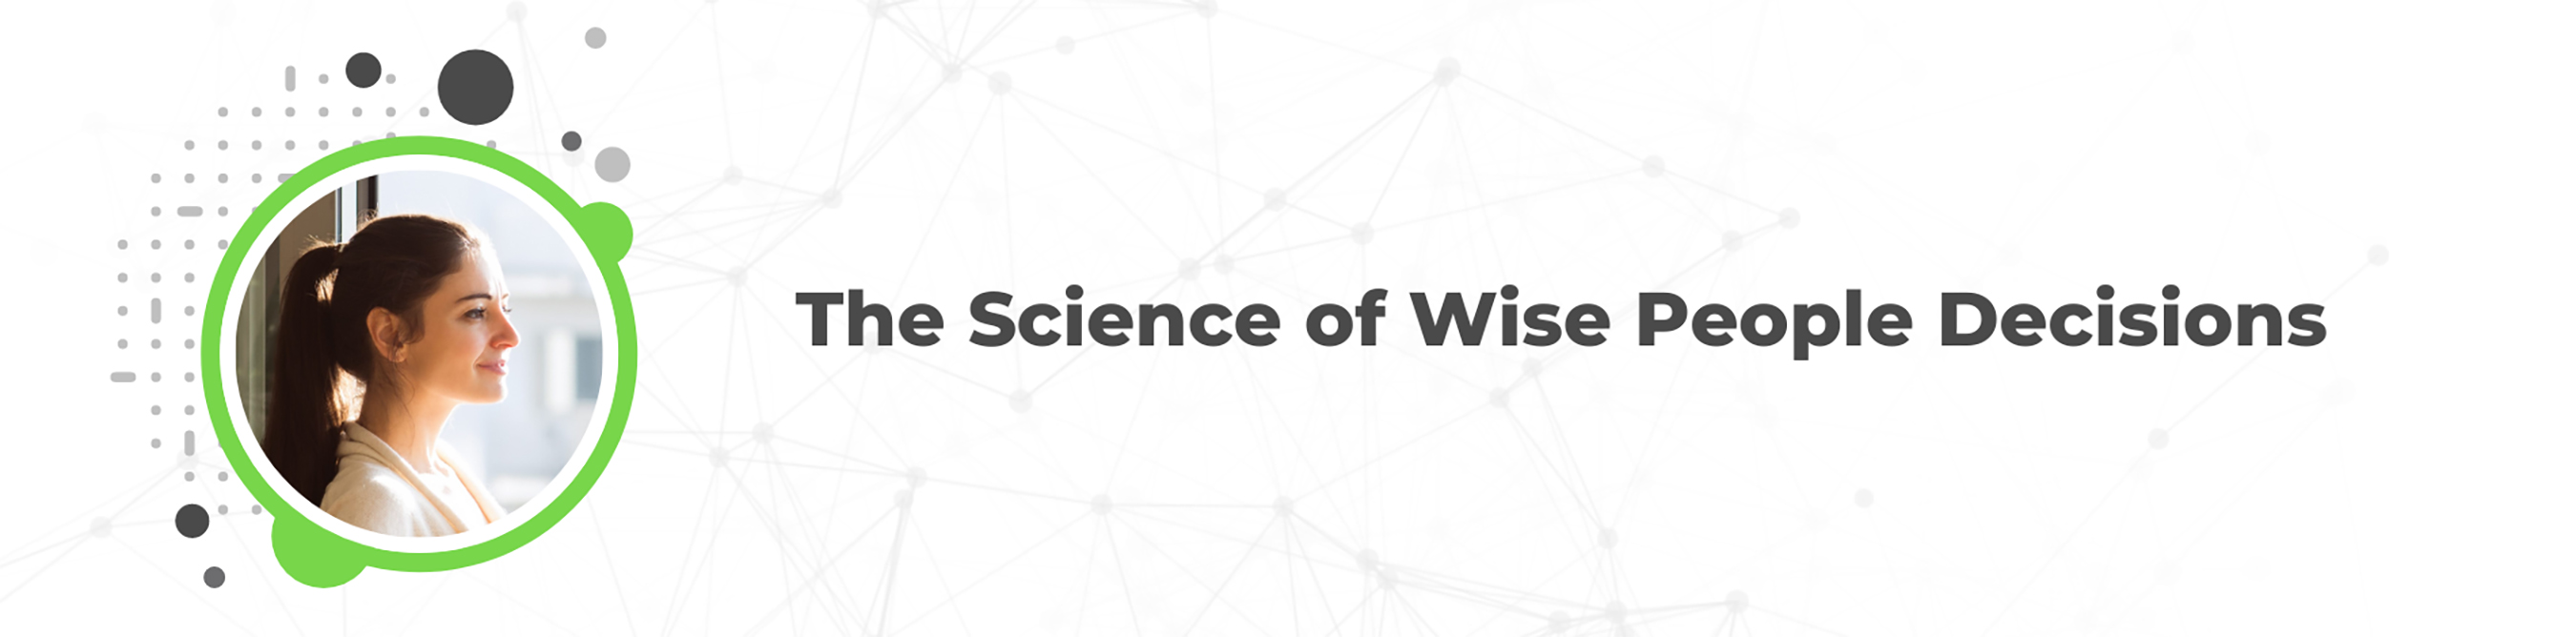 Banner that says "The science of wise people decisions"